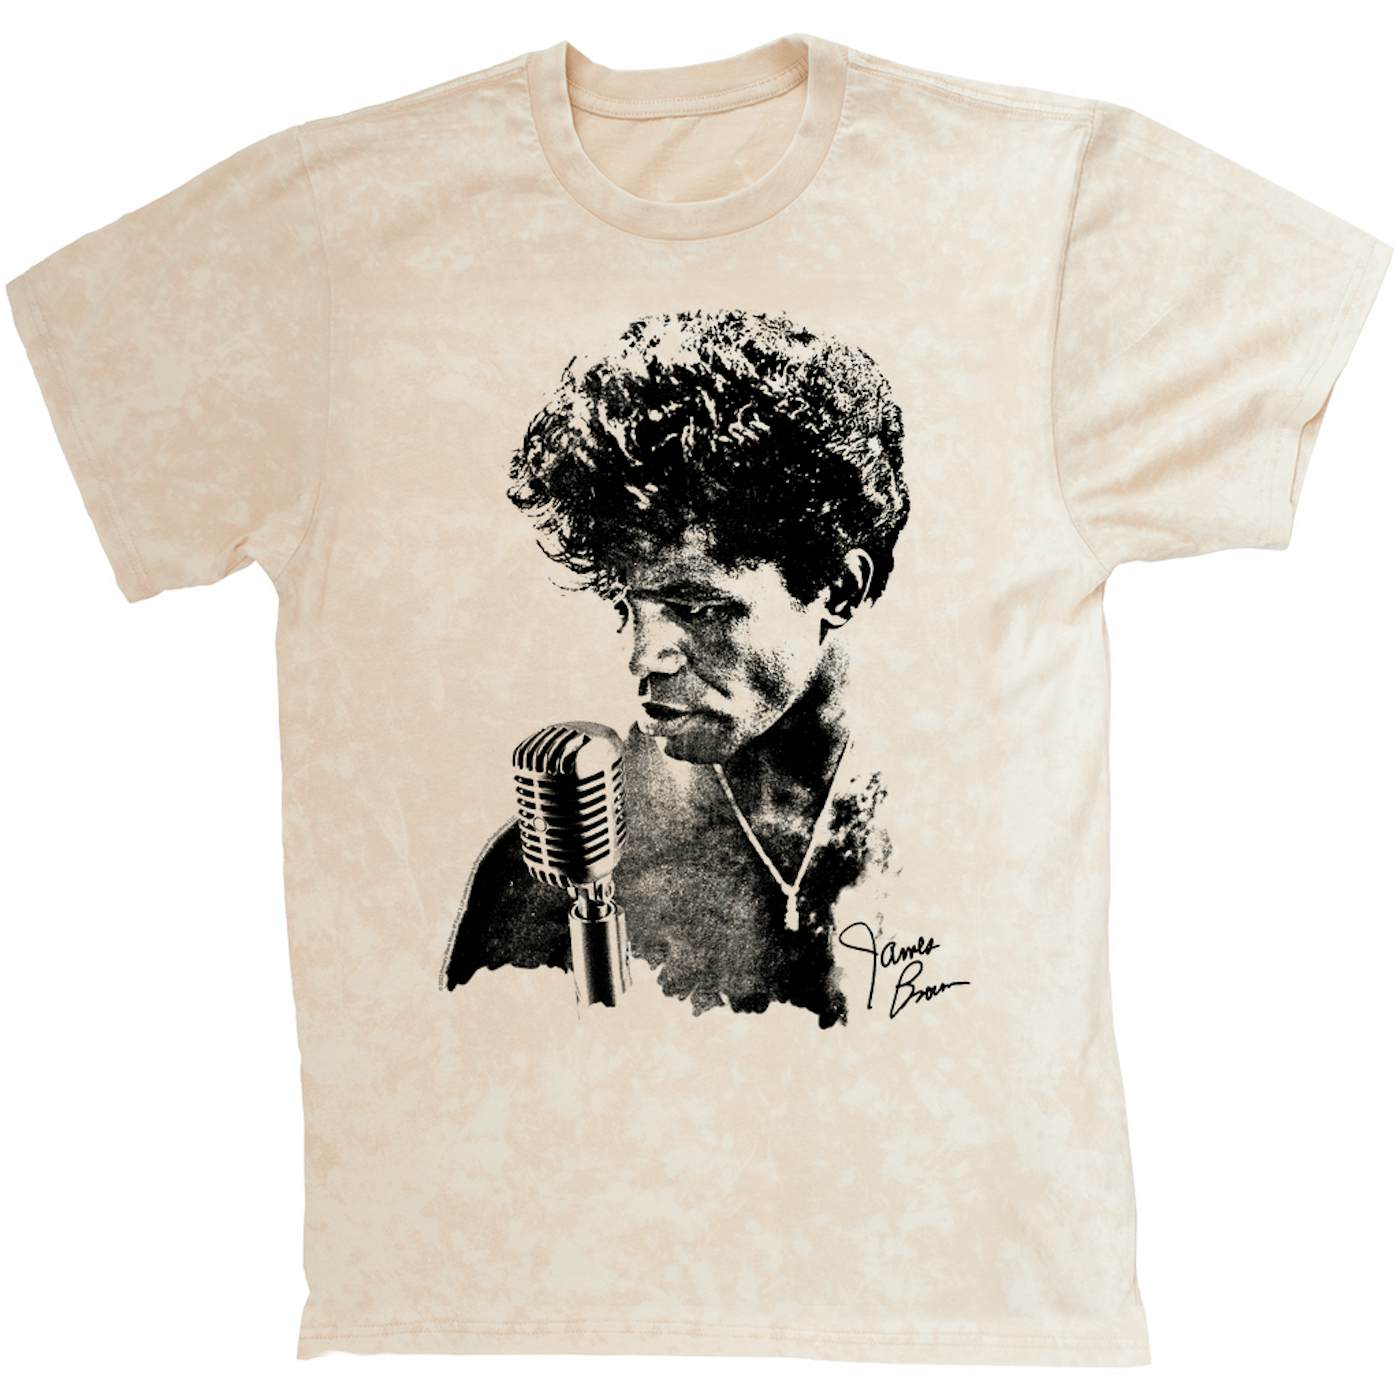 James Brown T-shirt | Grainy Black White Photo With Signature James Brown Mineral Wash Shirt